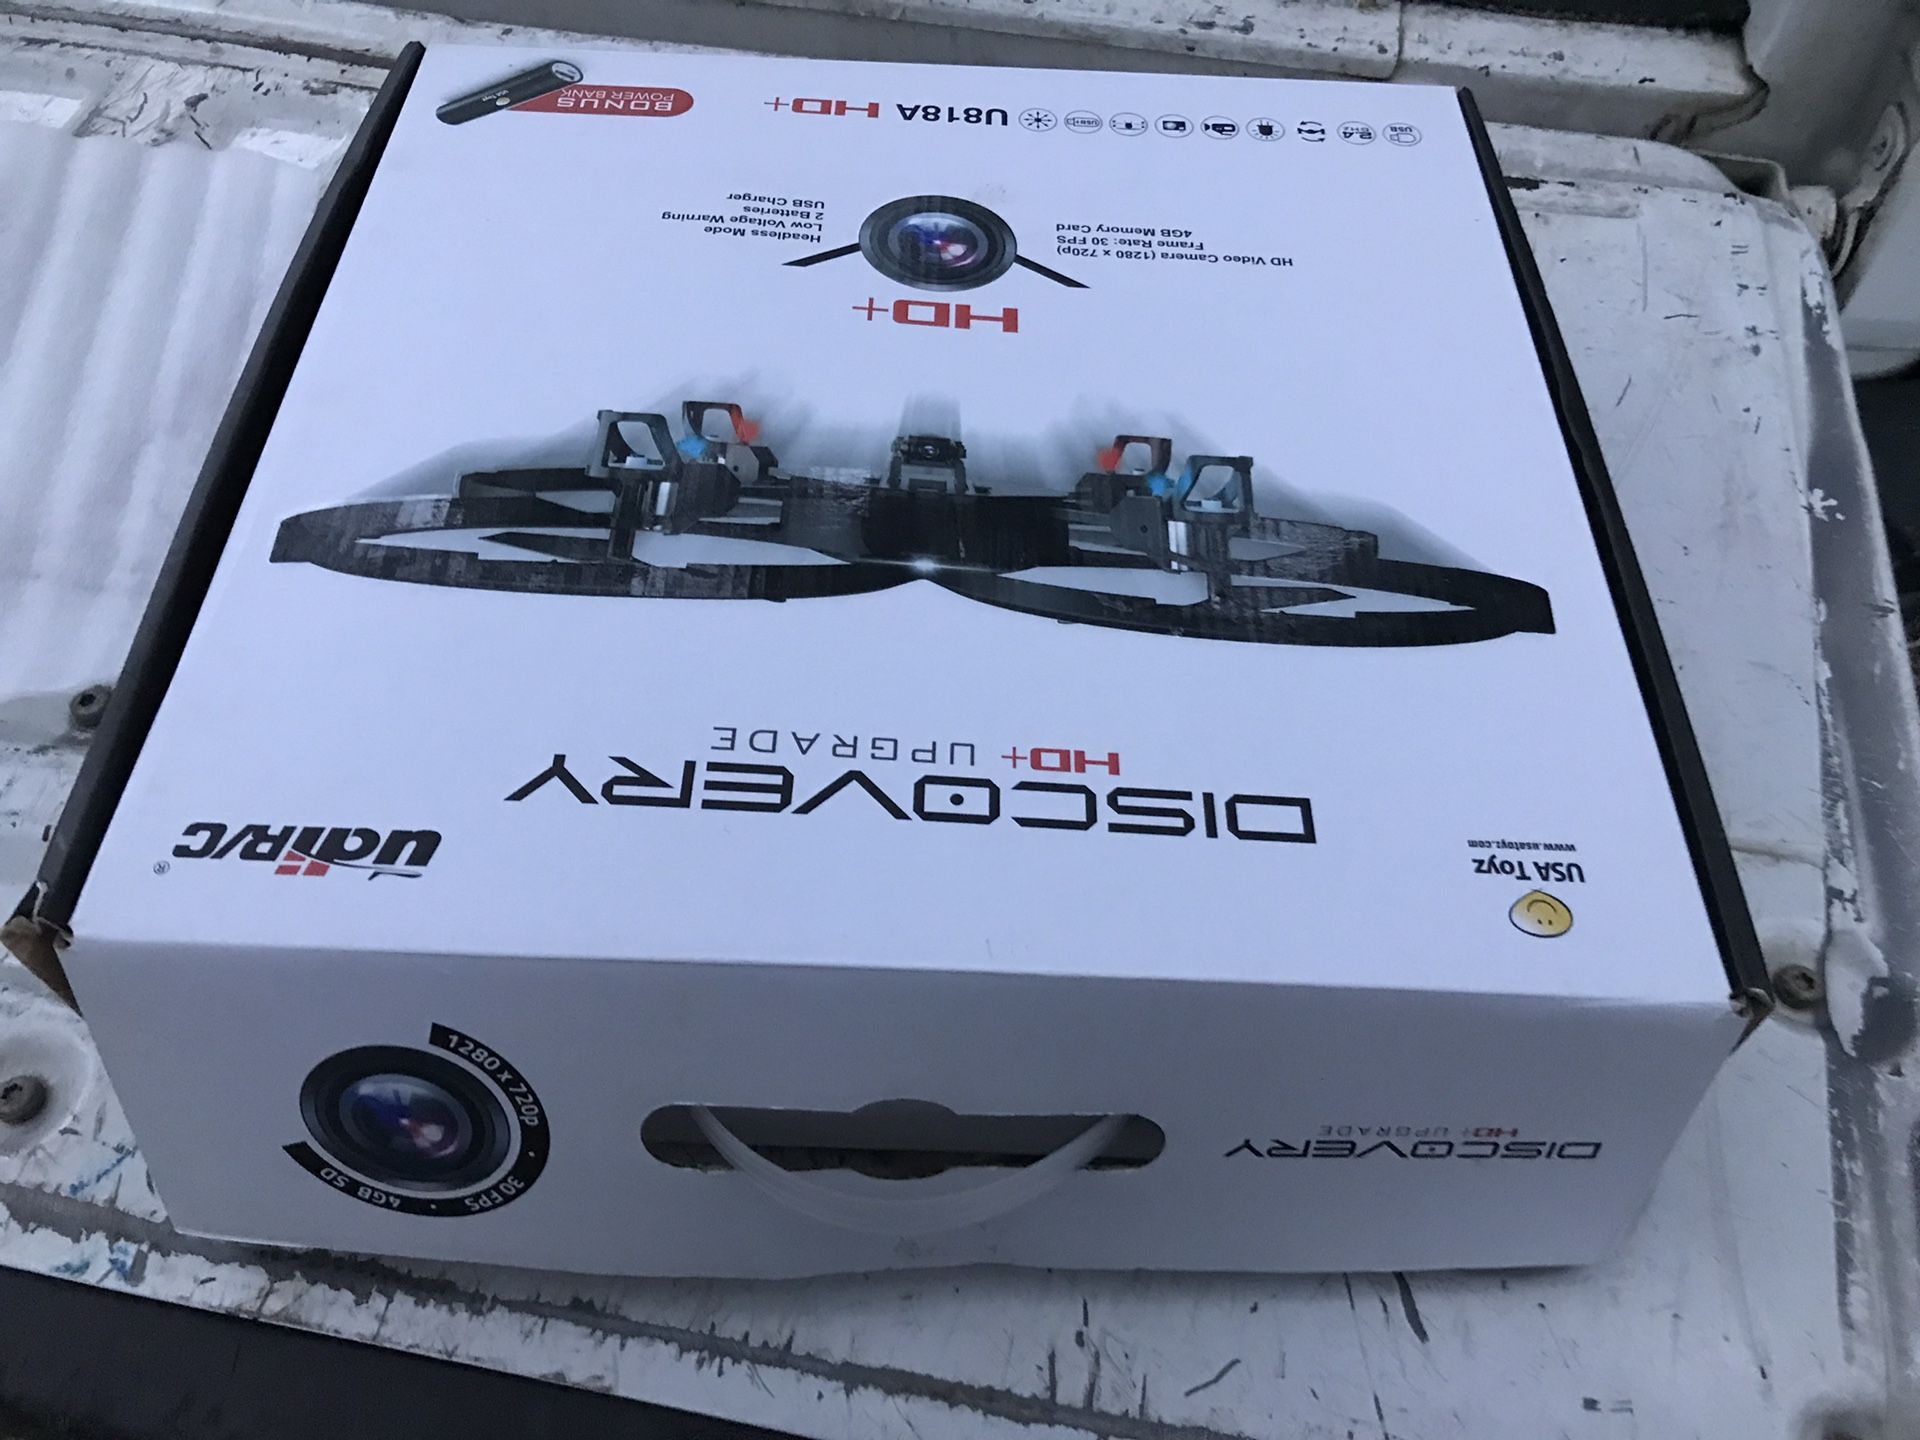 Discovery HD upgrade Drone